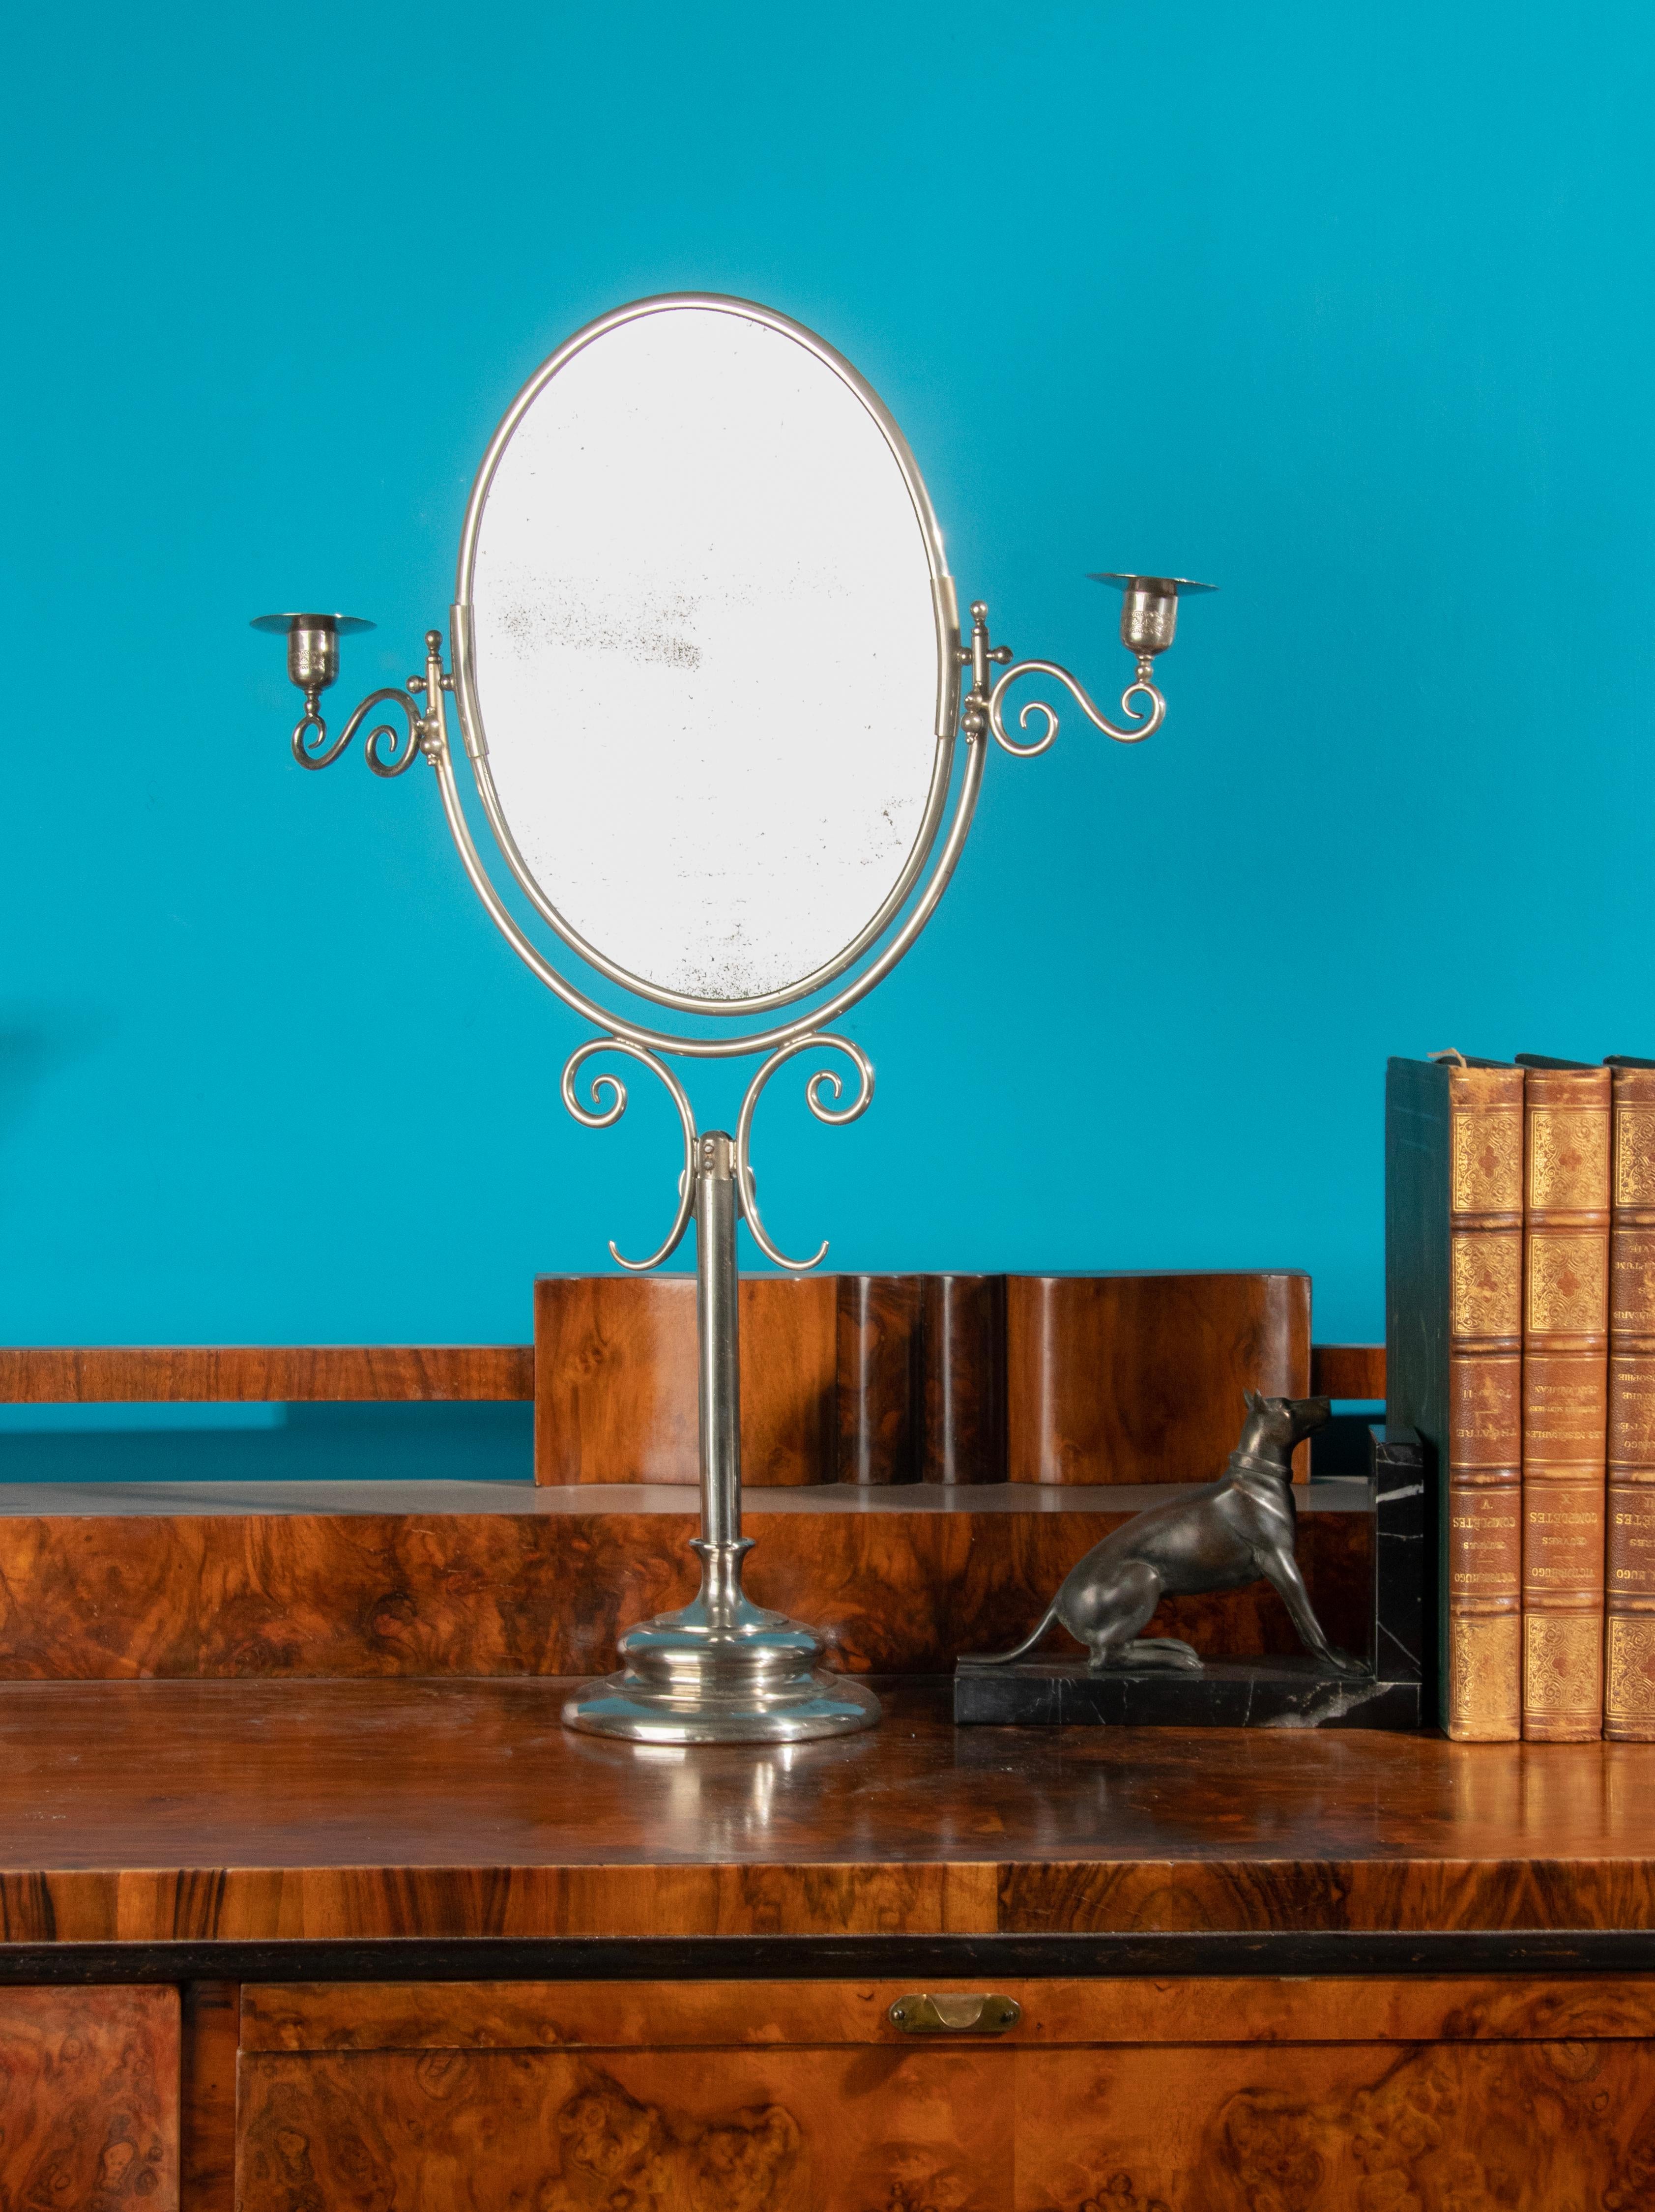 An elegant table vanity mirror. Made of chrome plated metal. The mirror are flanked with two candlesticks. The mirror is adjustable in height and the mirror can tilt. The mirror glass have some wear behind the glass, visibility is good. See